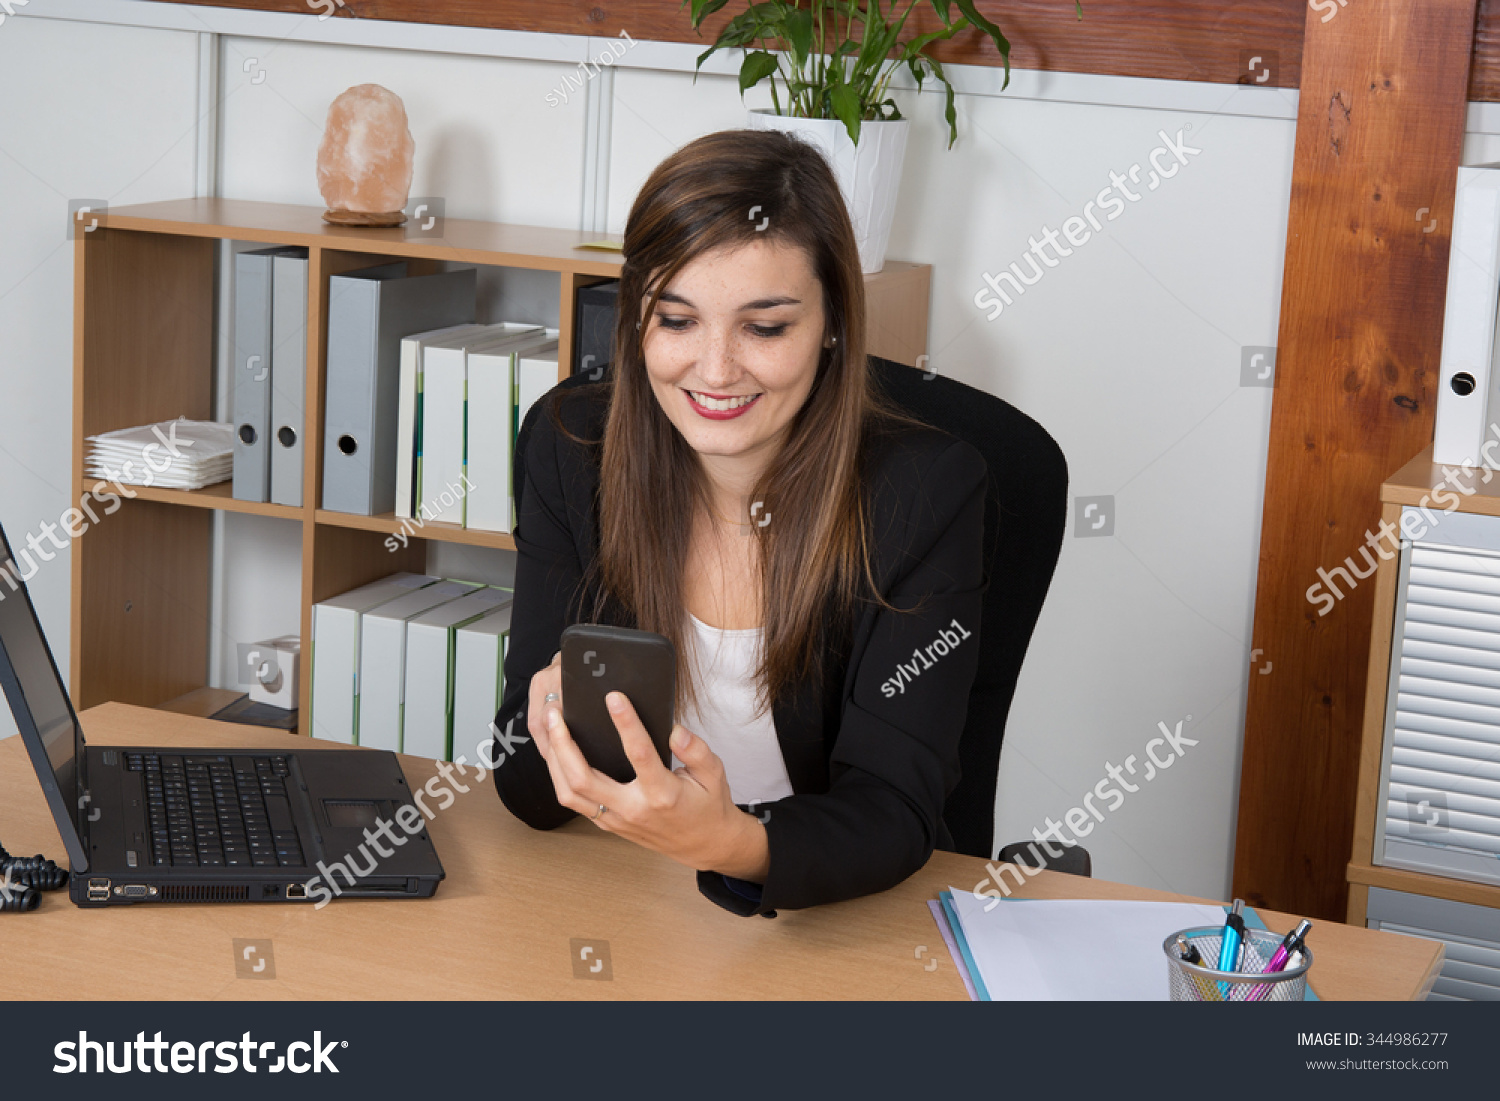 Happy office worker reading a text message at a bright office #344986277